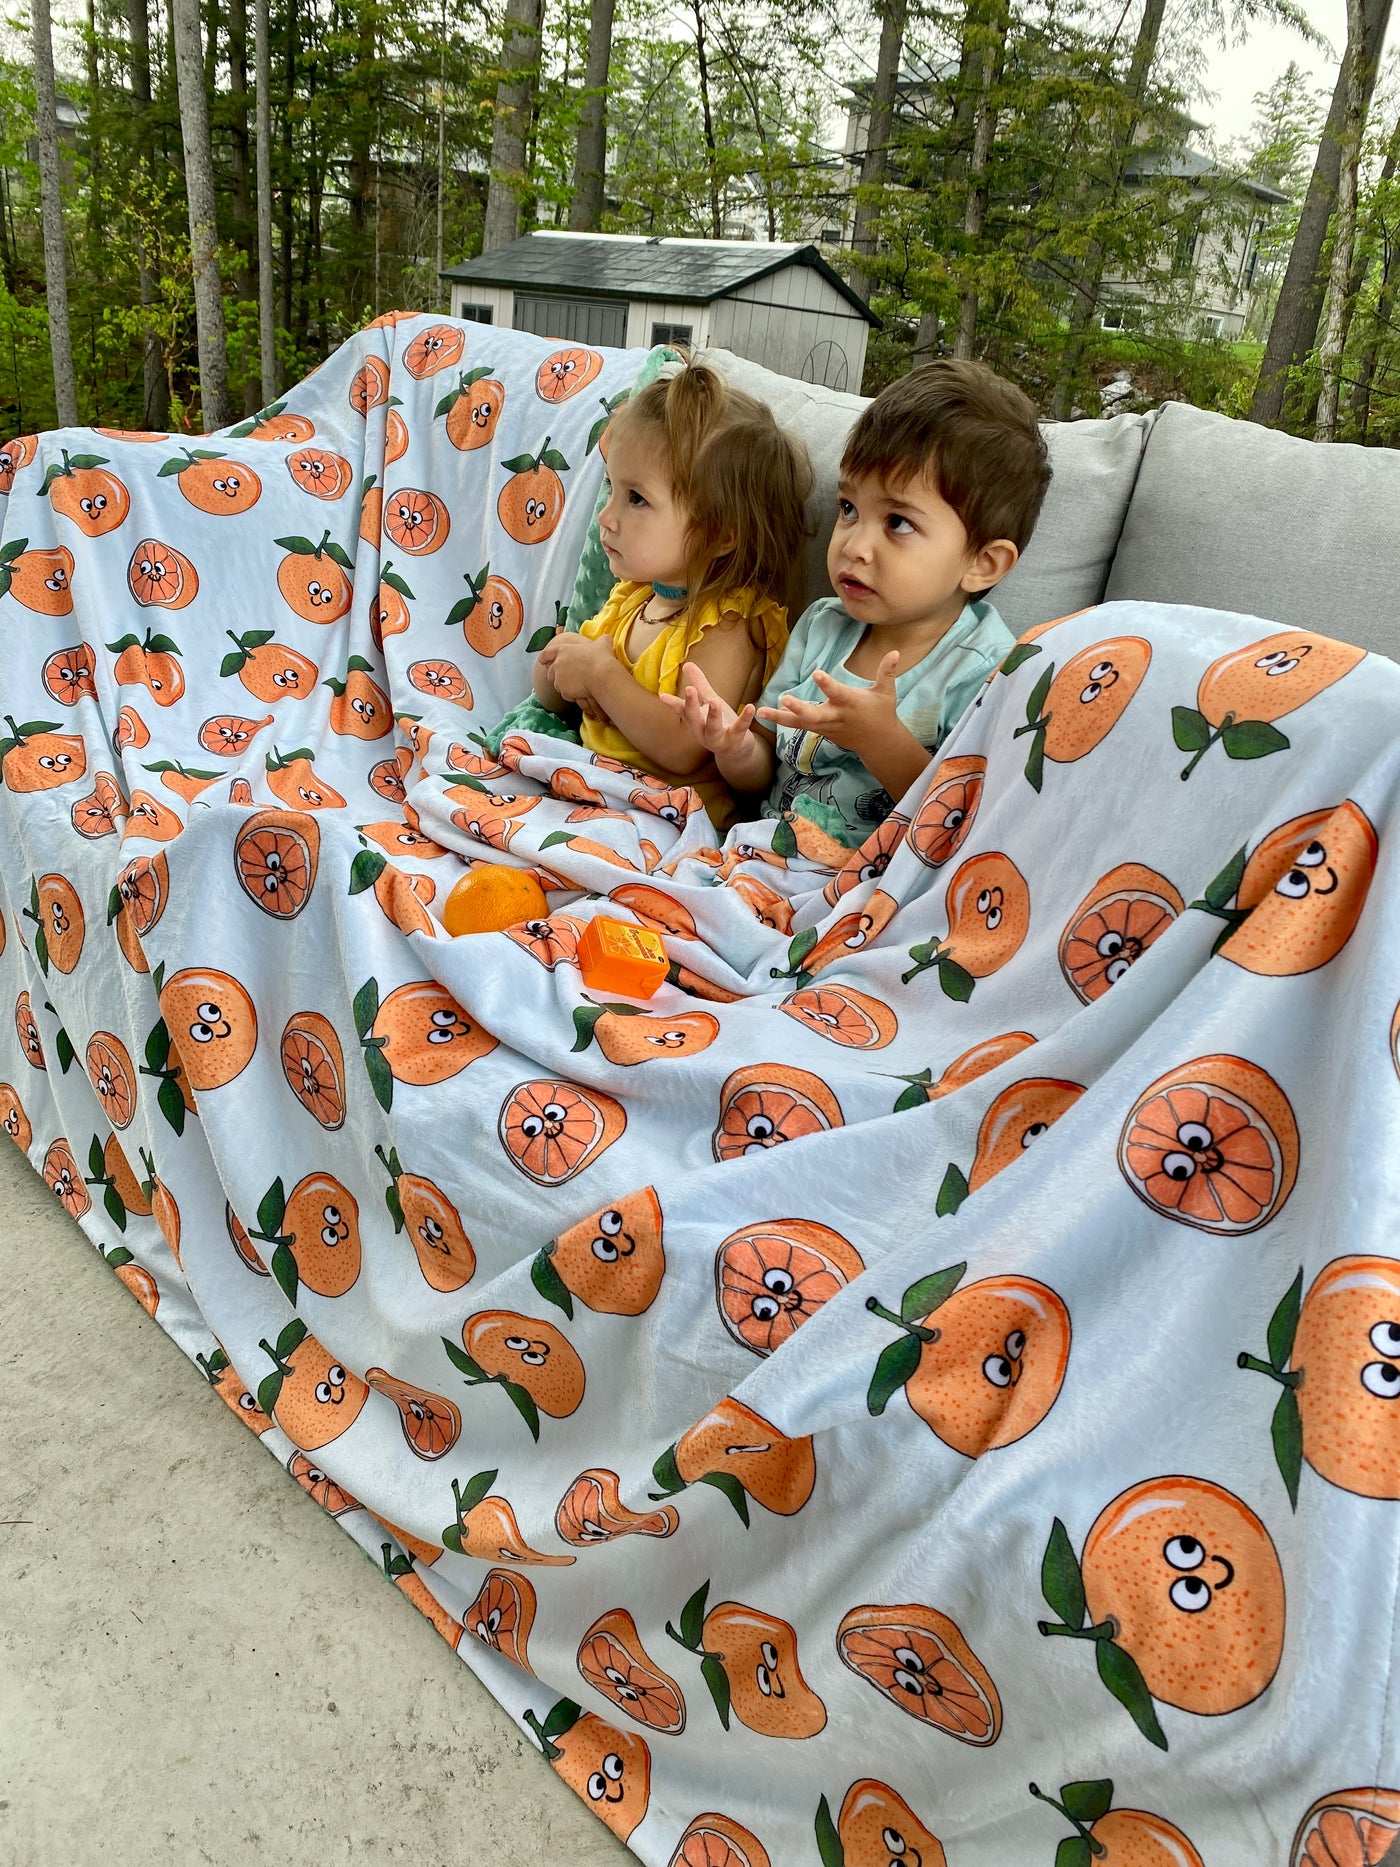 Giant blanket: Smiling Clementine